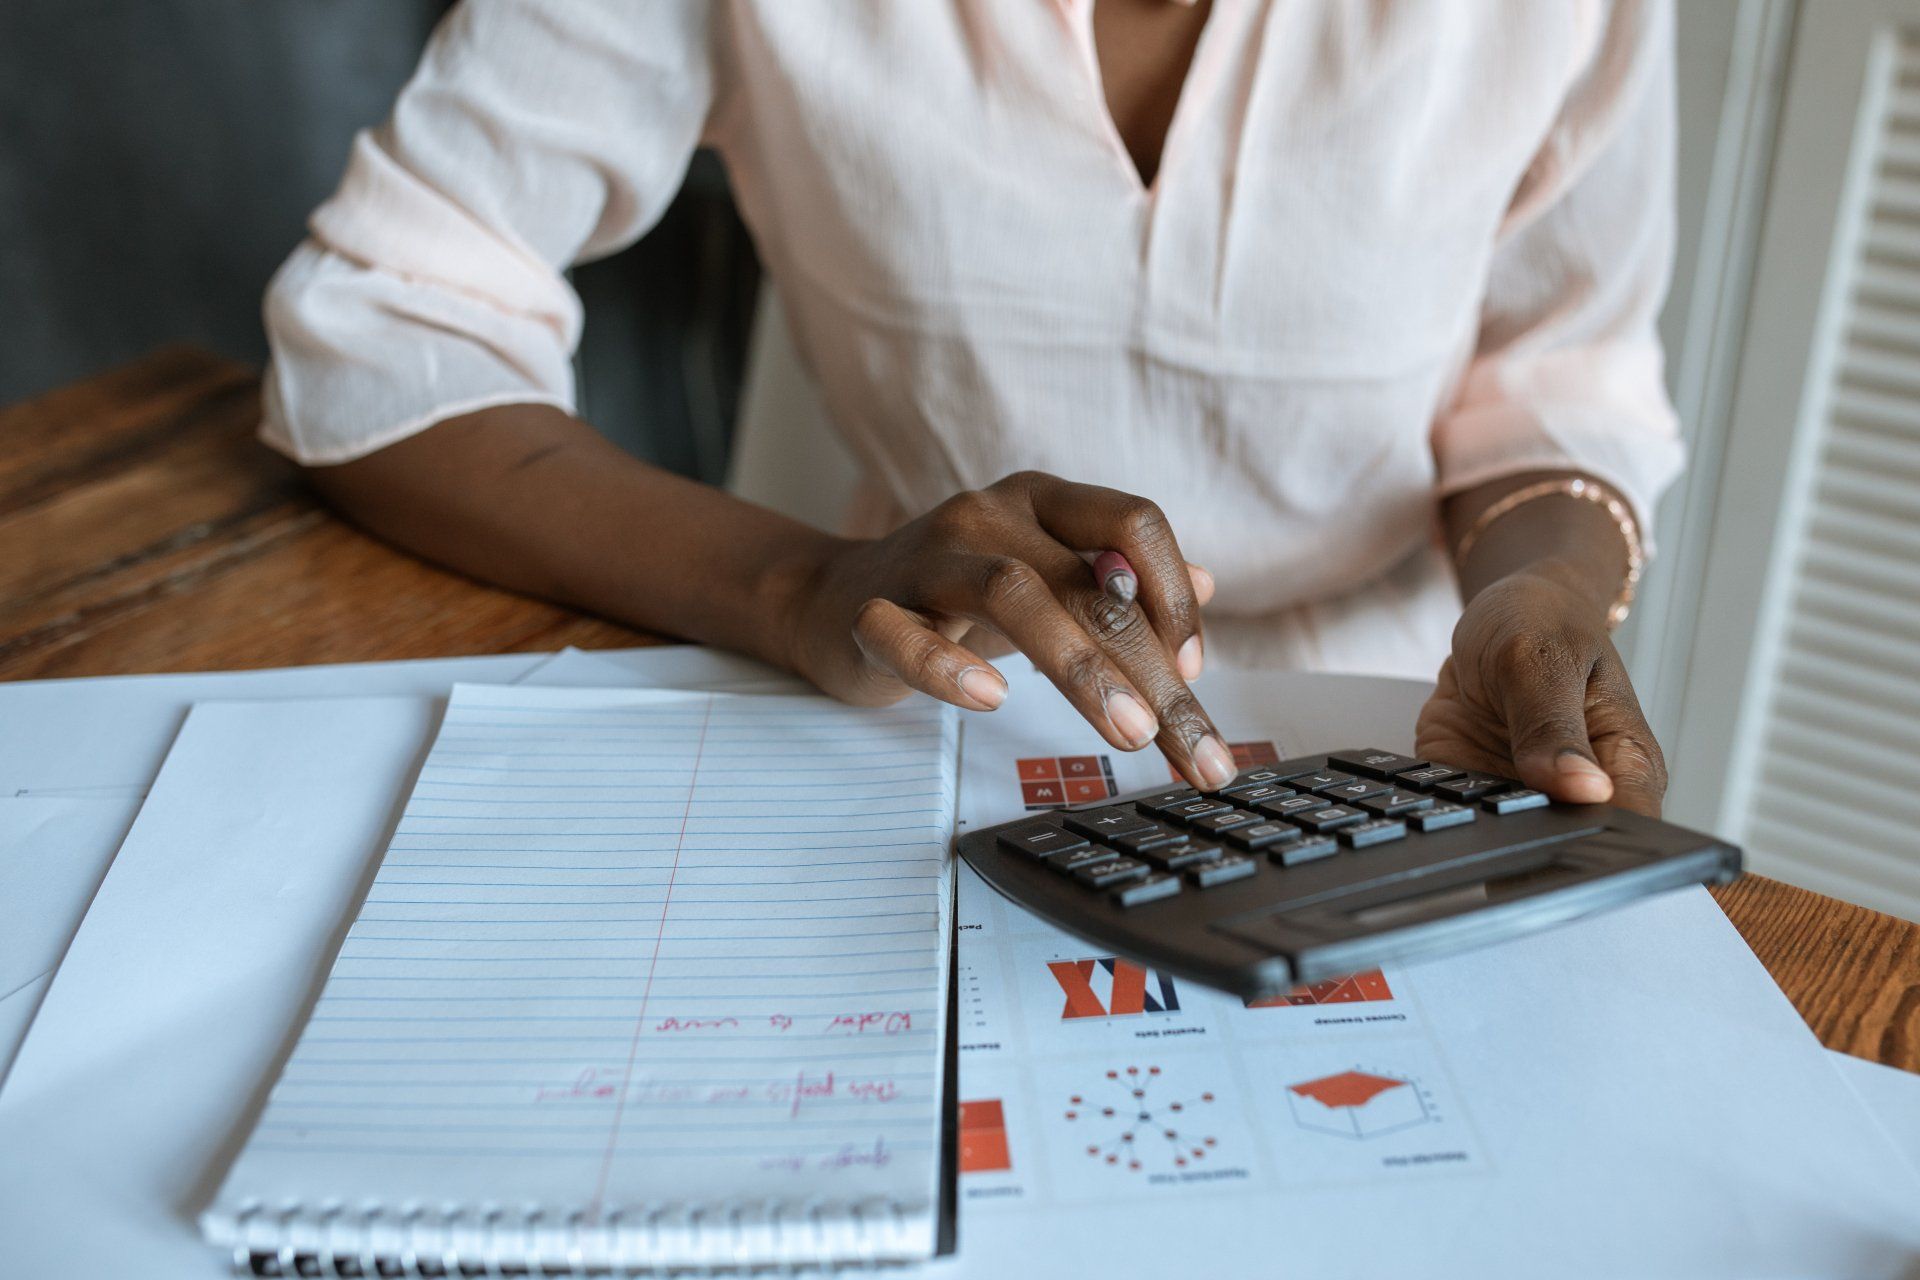 A woman is sitting at a table using a calculator.